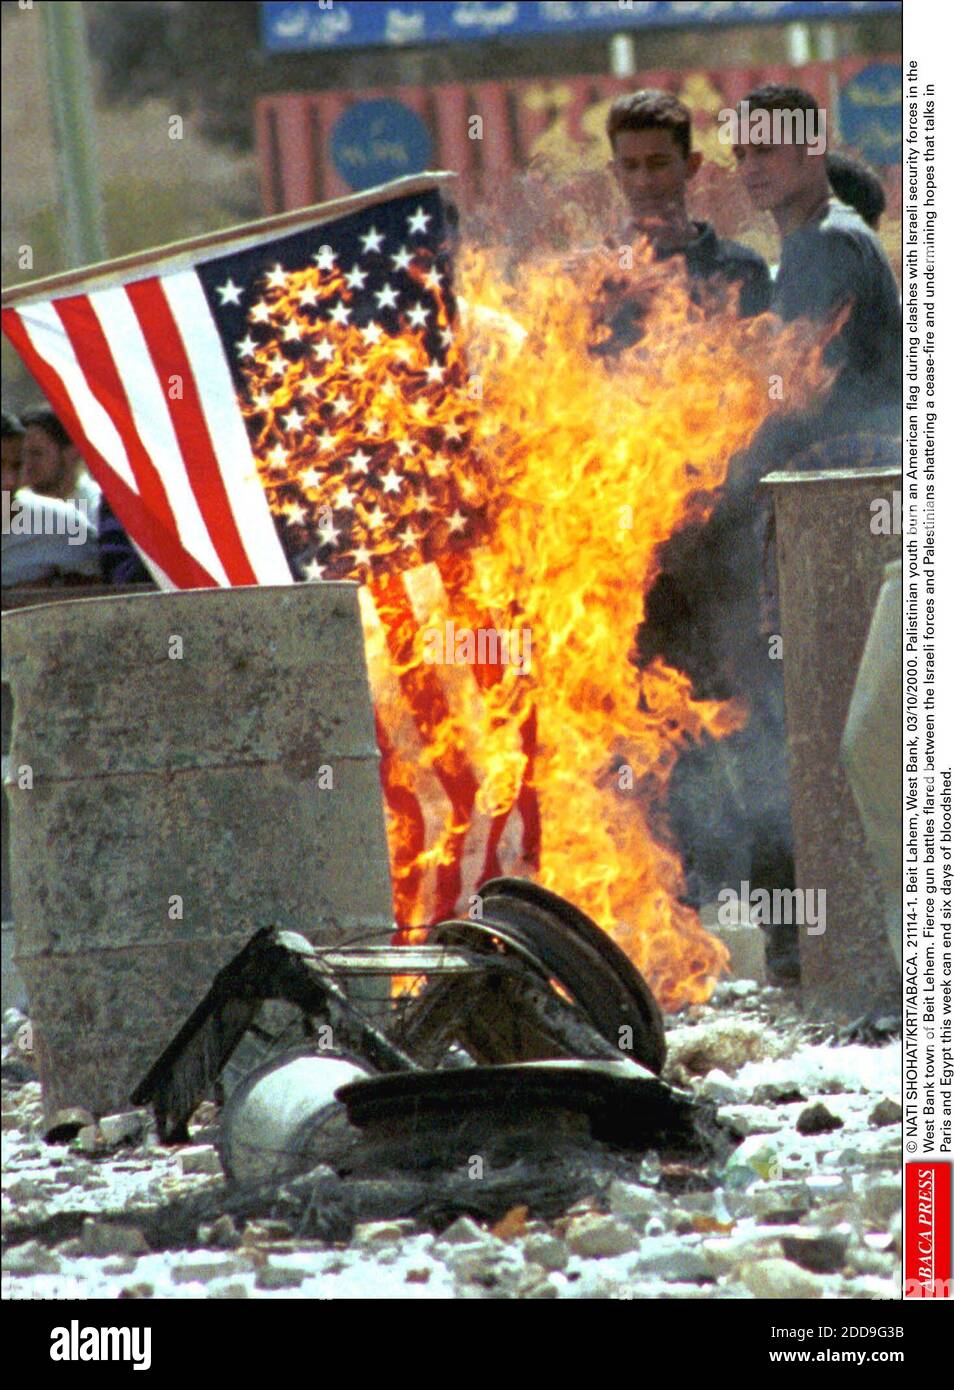 NO FILM, NO VIDEO, NO TV, NO DOCUMENTARY - © NATI SHOHAT/KRT/ABACA. 21114-1. Beit Lahem, West Bank, 03/10/2000. Palistinian youth burn an American flag during clashes with Israeli security forces in the West Bank town of Beit Lehem. Fierce gun battles flared between the Israeli forces and Palestin Stock Photo